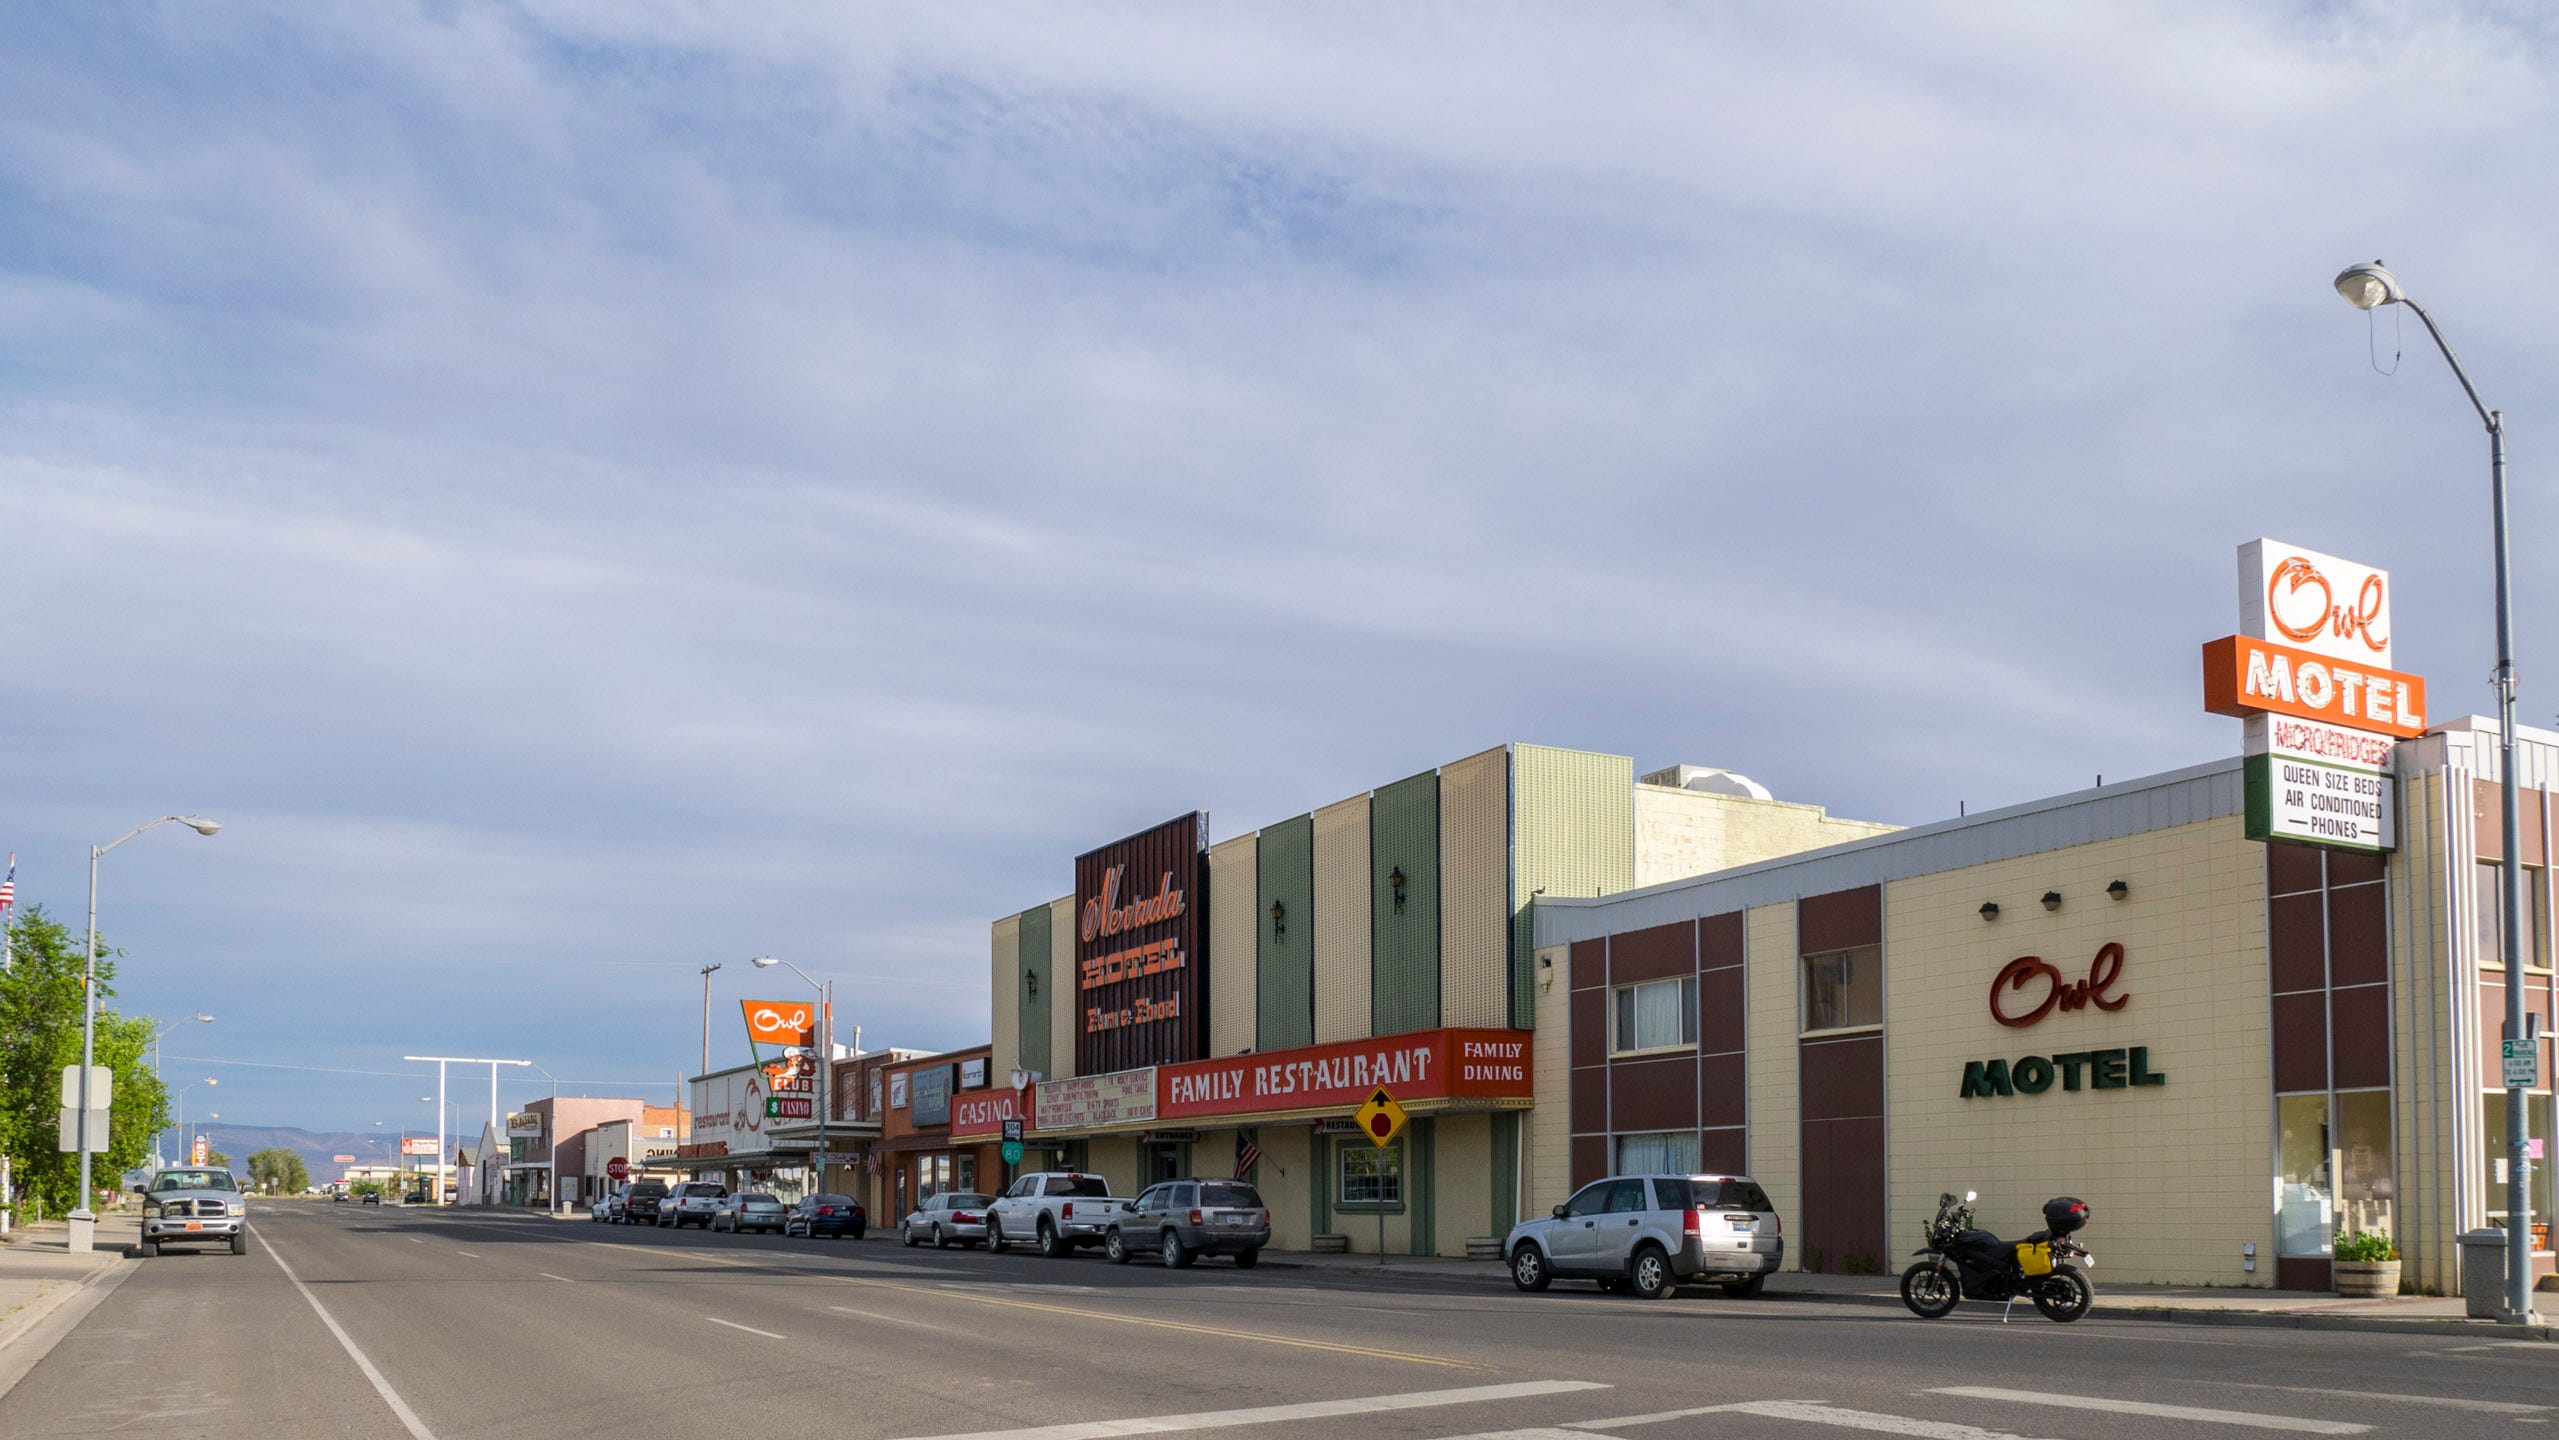 Photograph of downtown Battle Mountain. The main street is wide - two lanes and parking in each direction, and the building are low one- and two- story buildings. The Zero motorycle is parked across the street in front of the rectilinear, mid-century Owl Motel with a simply pale yellow concrete block facade interrupted by vertical areas of maroon panels trimmed by thin aluminum mullions. The mullions create a grid within which simple rectangular window site. An old neon sign "Owl Motel / Microfridges / Queen Size Beds / Air Conditioner / Phones" juts out from the facade. The name "Owl Motel" is set upon the facade, "Owl" in script, "Motel" in all caps. Besides the Owl Motel is a slightly taller building, the "Nevada Hotel", with vertical panels of pale yellow and green and a red marquee that reads "Casino" and "Family Restaurant." Beyond, are low one story retail stores. The street sits low in the photo, beneath a blue sky streaked with clouds. The overall vibe is quiet.